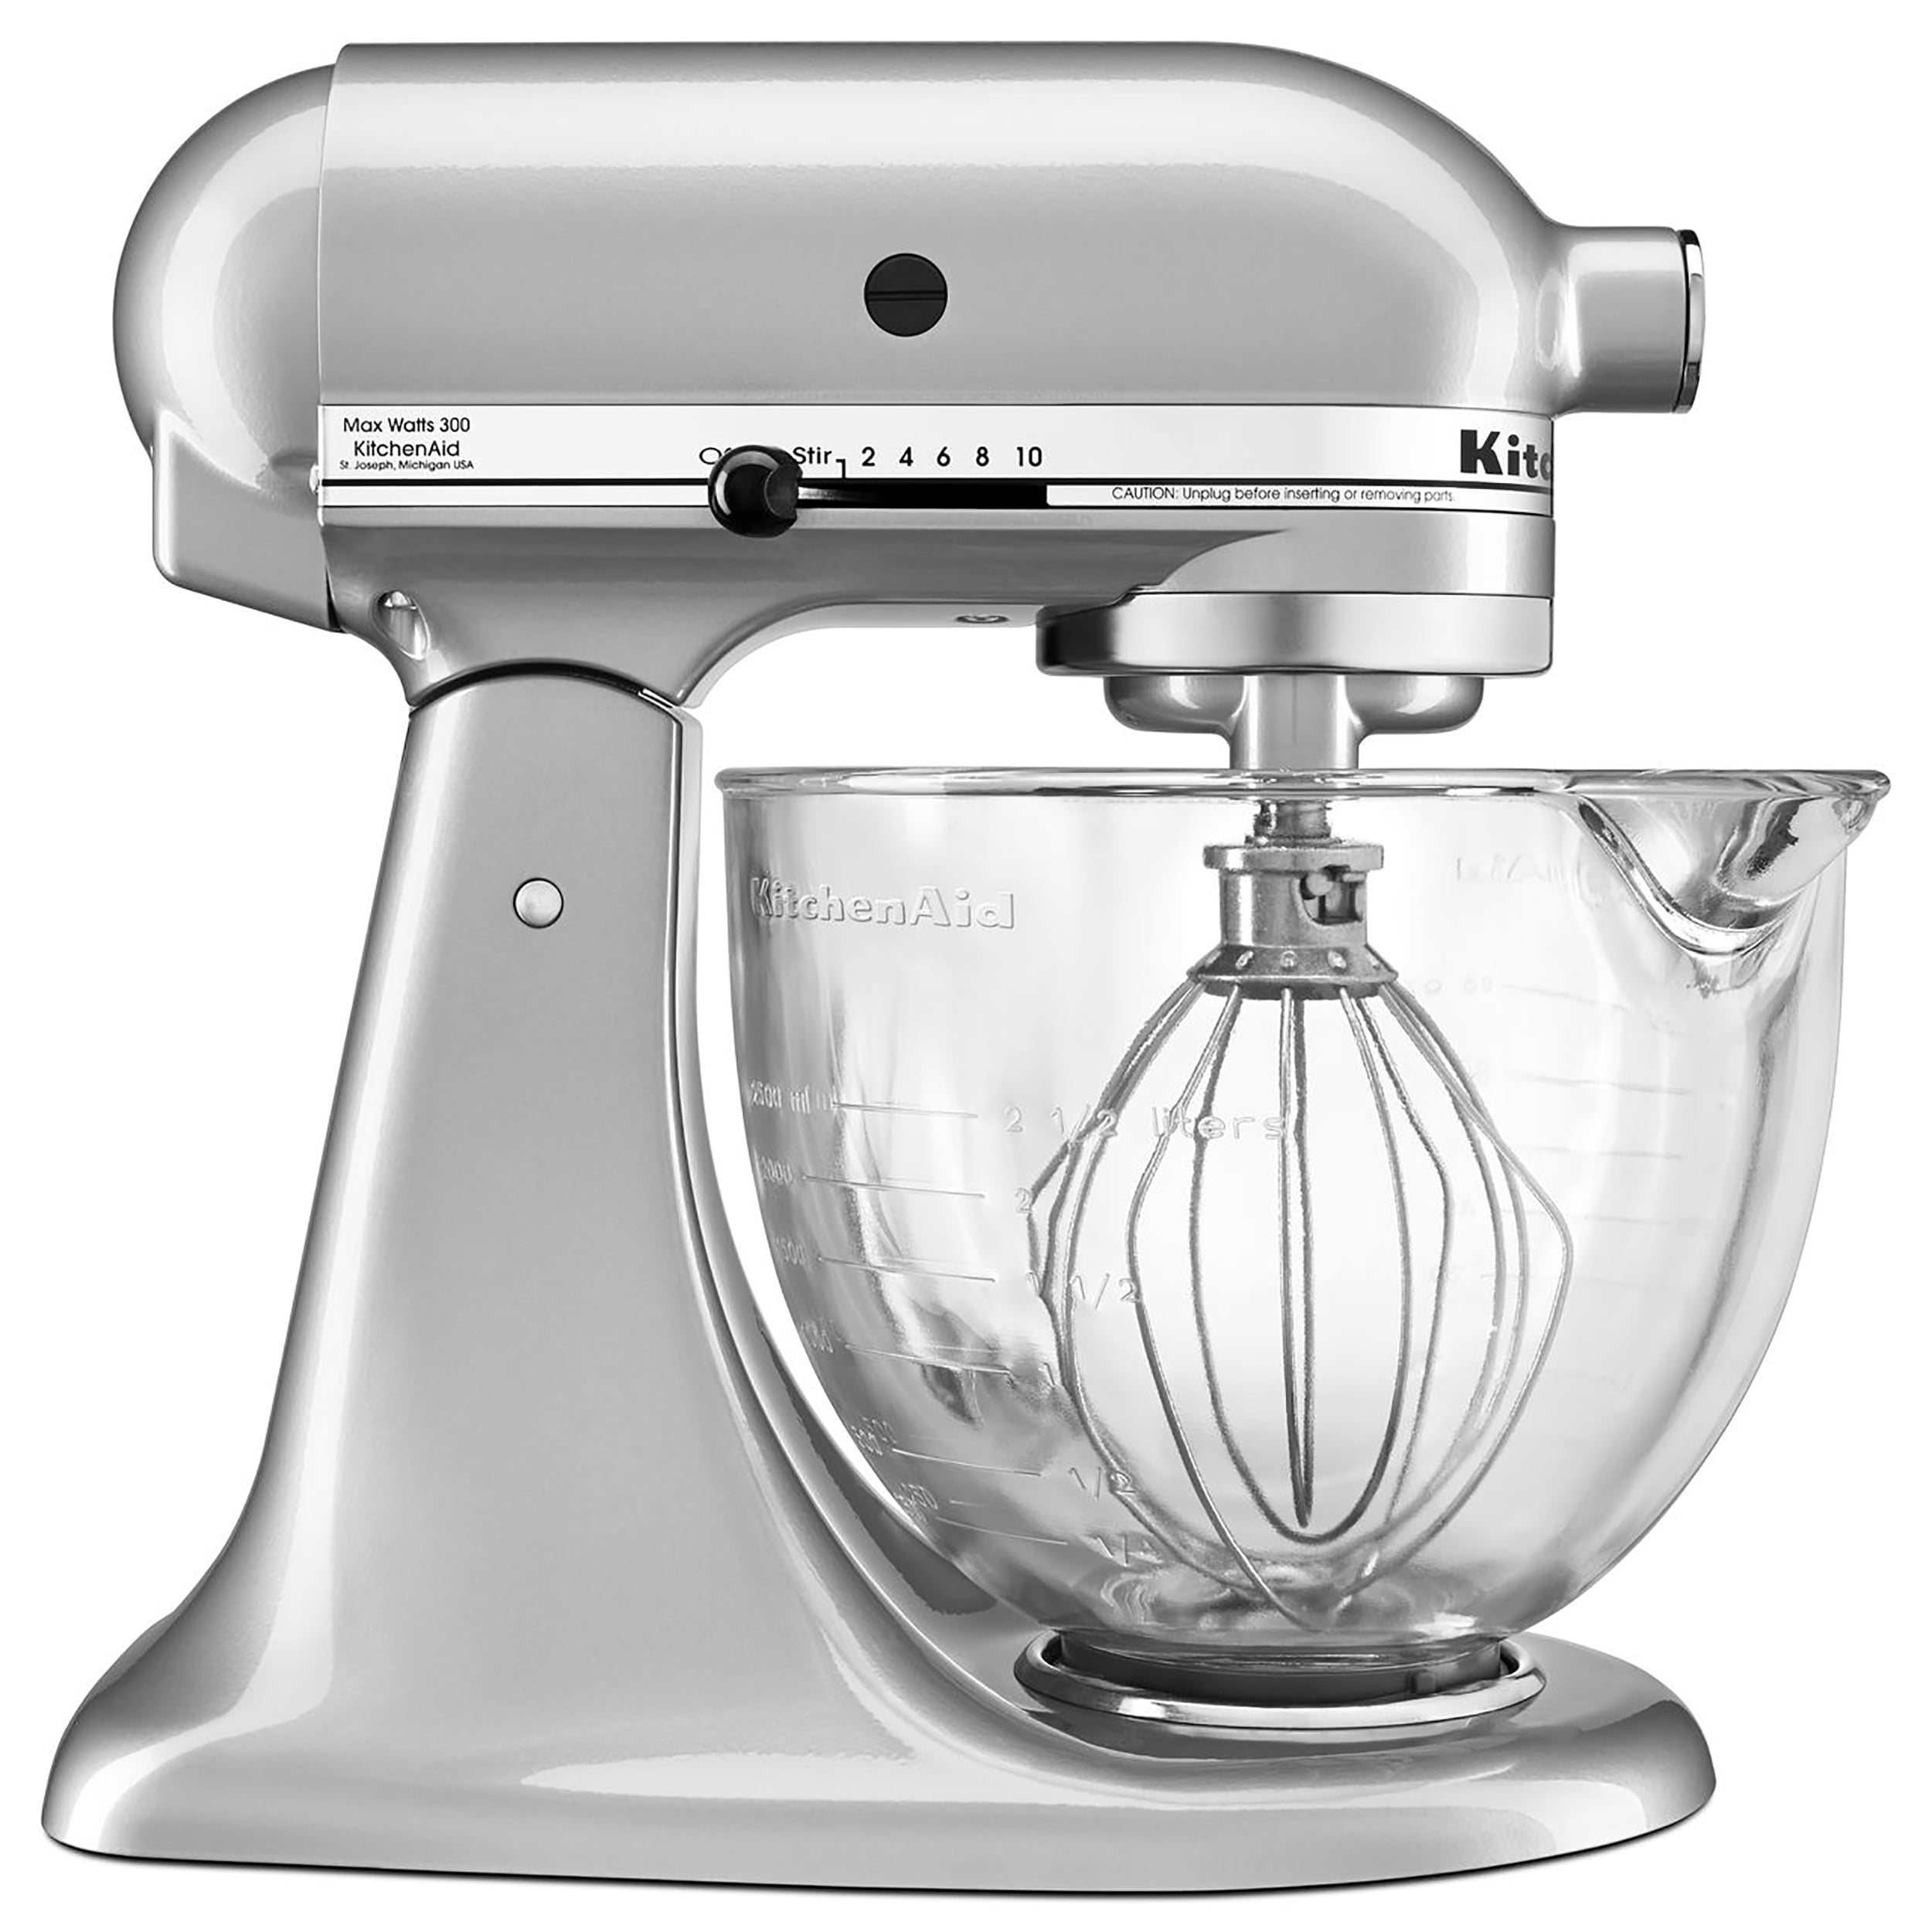 Lawenme Mixer Glass Bowl Cover for KitchenAid k5gb 5 Quart Tilt-Head Stand Mixer, Splash Guard with Add Ingredient Opening, Glass Bowl Lid to